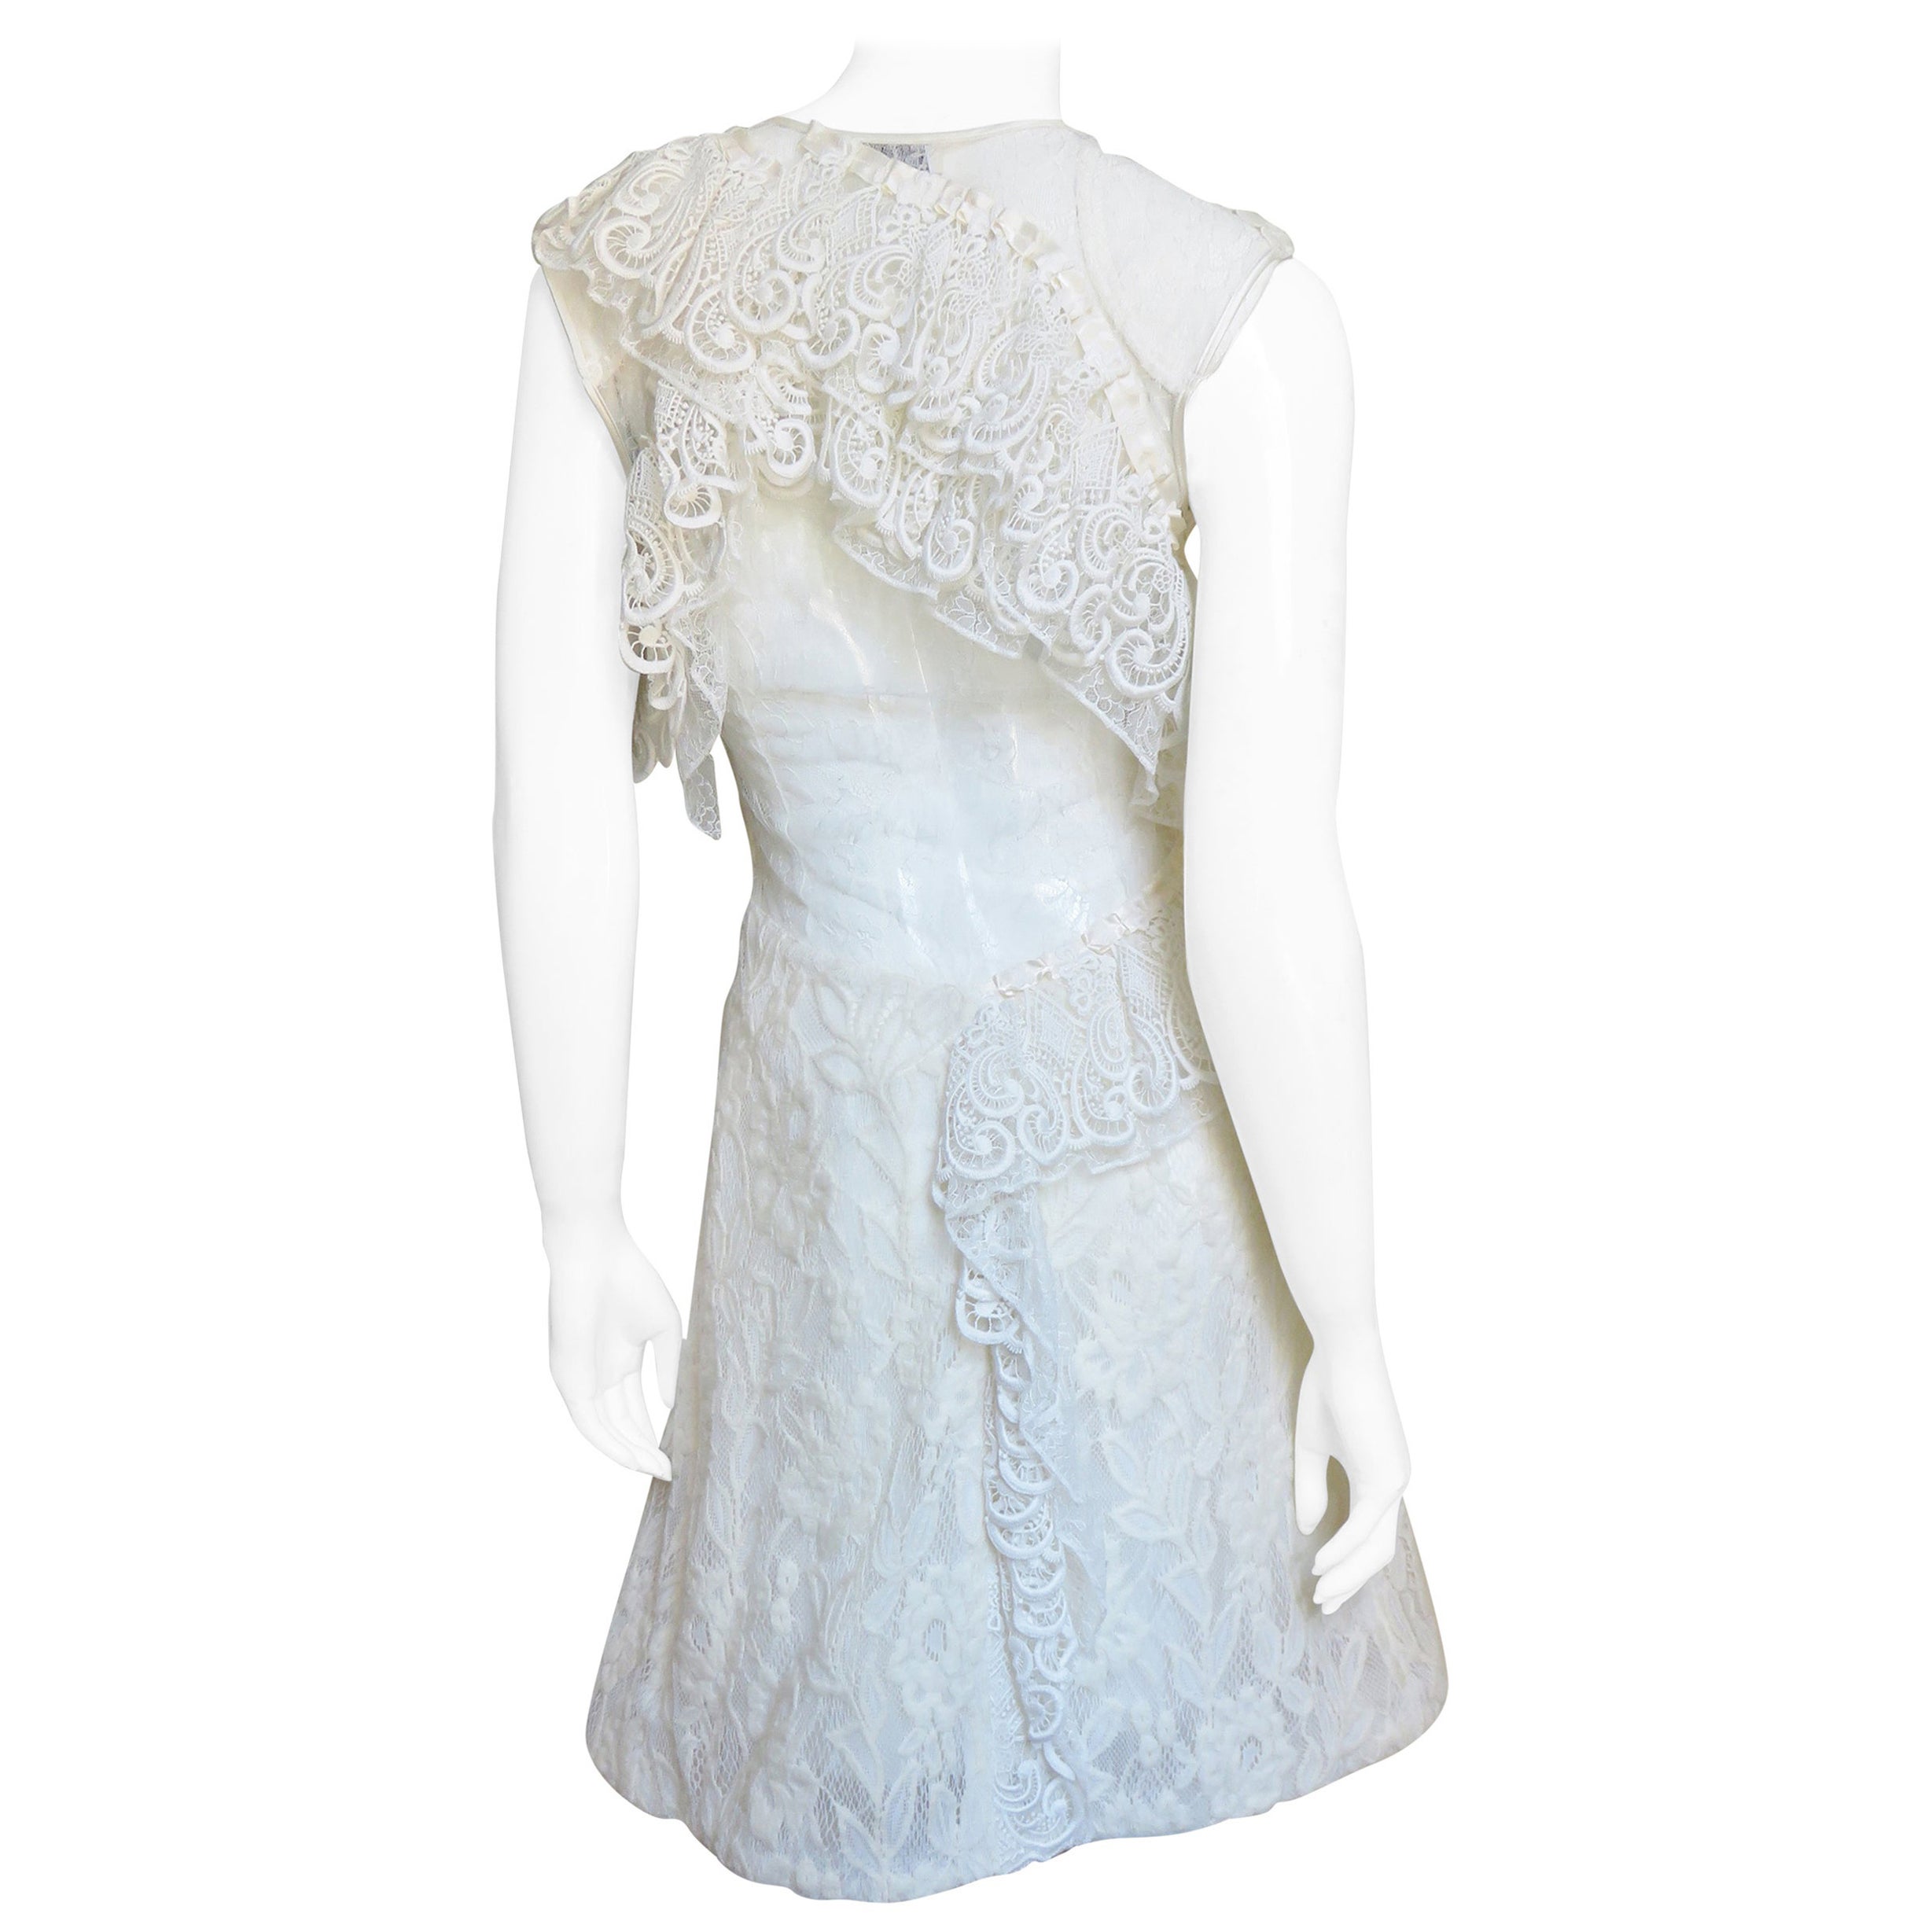 Nina Ricci Romantic Runway Delight Lace Confection Dress Gown For Sale ...